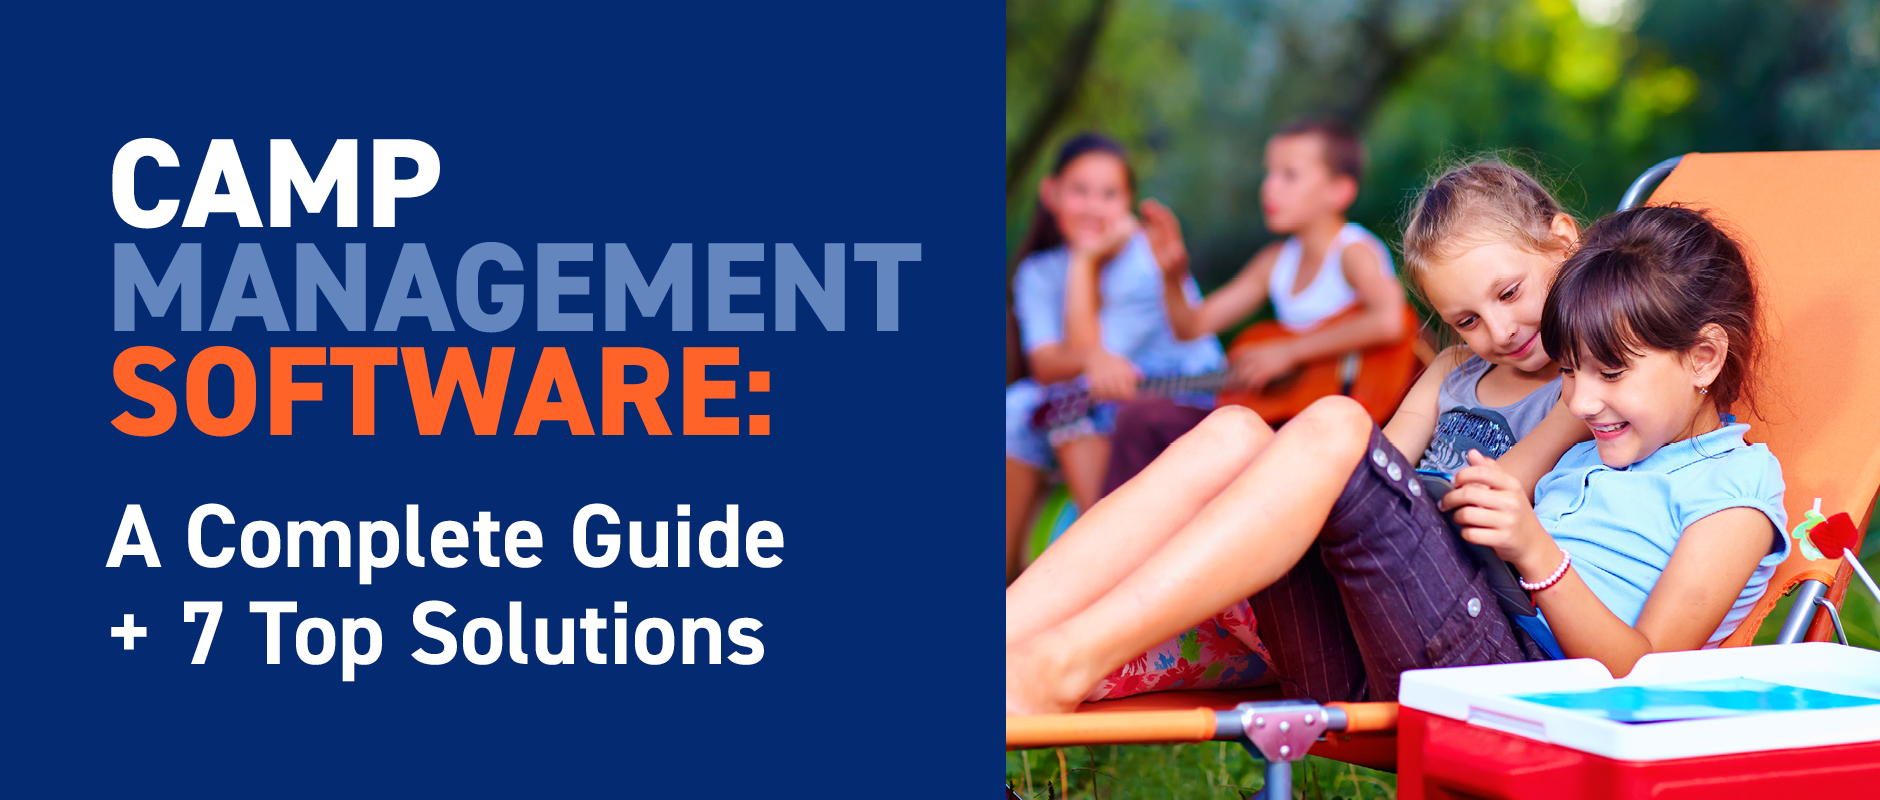 This guide will go over the basics of camp management software and suggest seven top solutions to purchase.